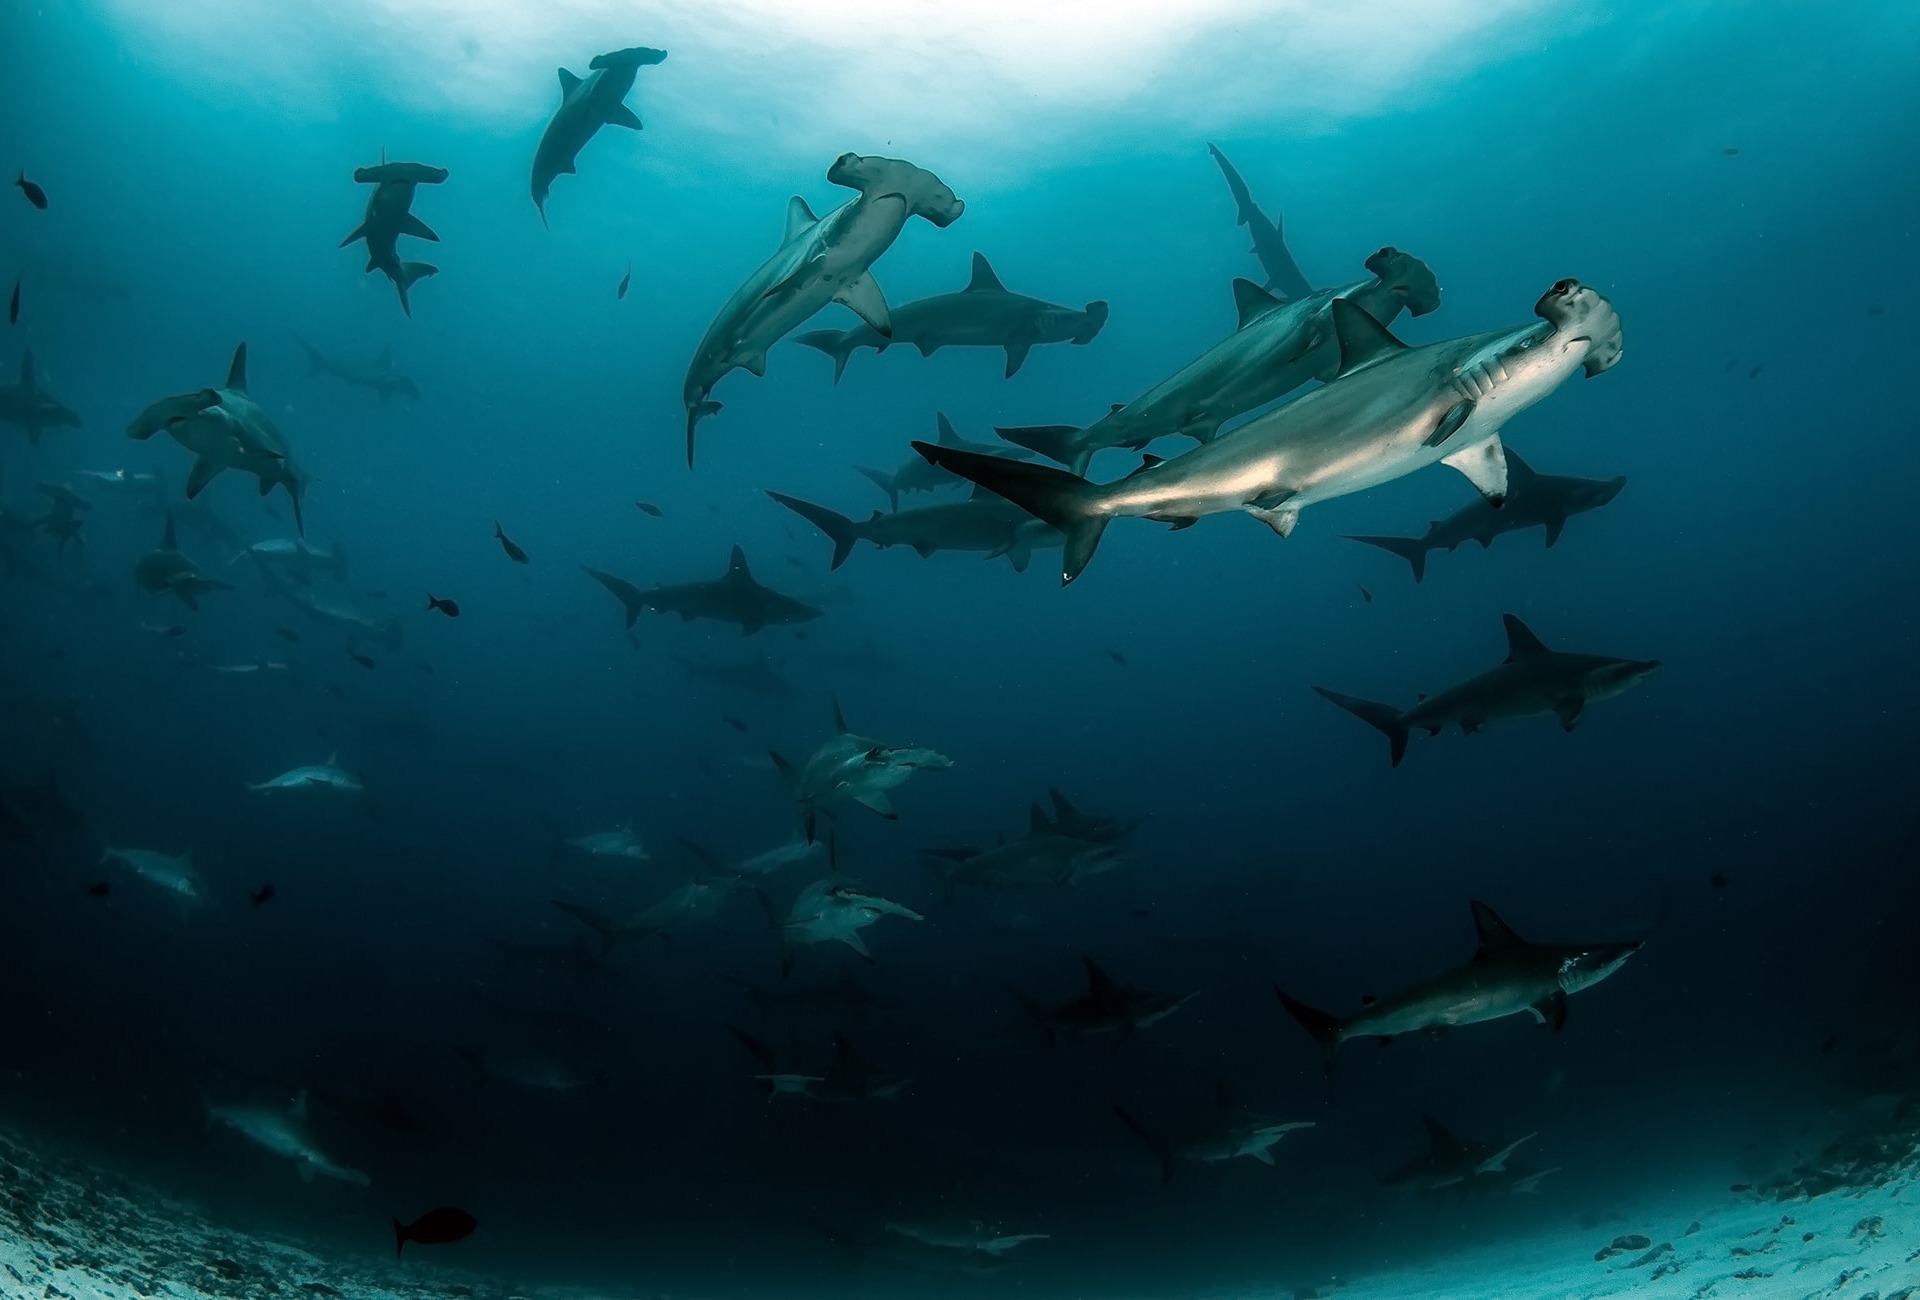 Scalloped Hammerheads, by Tomas Kotouc